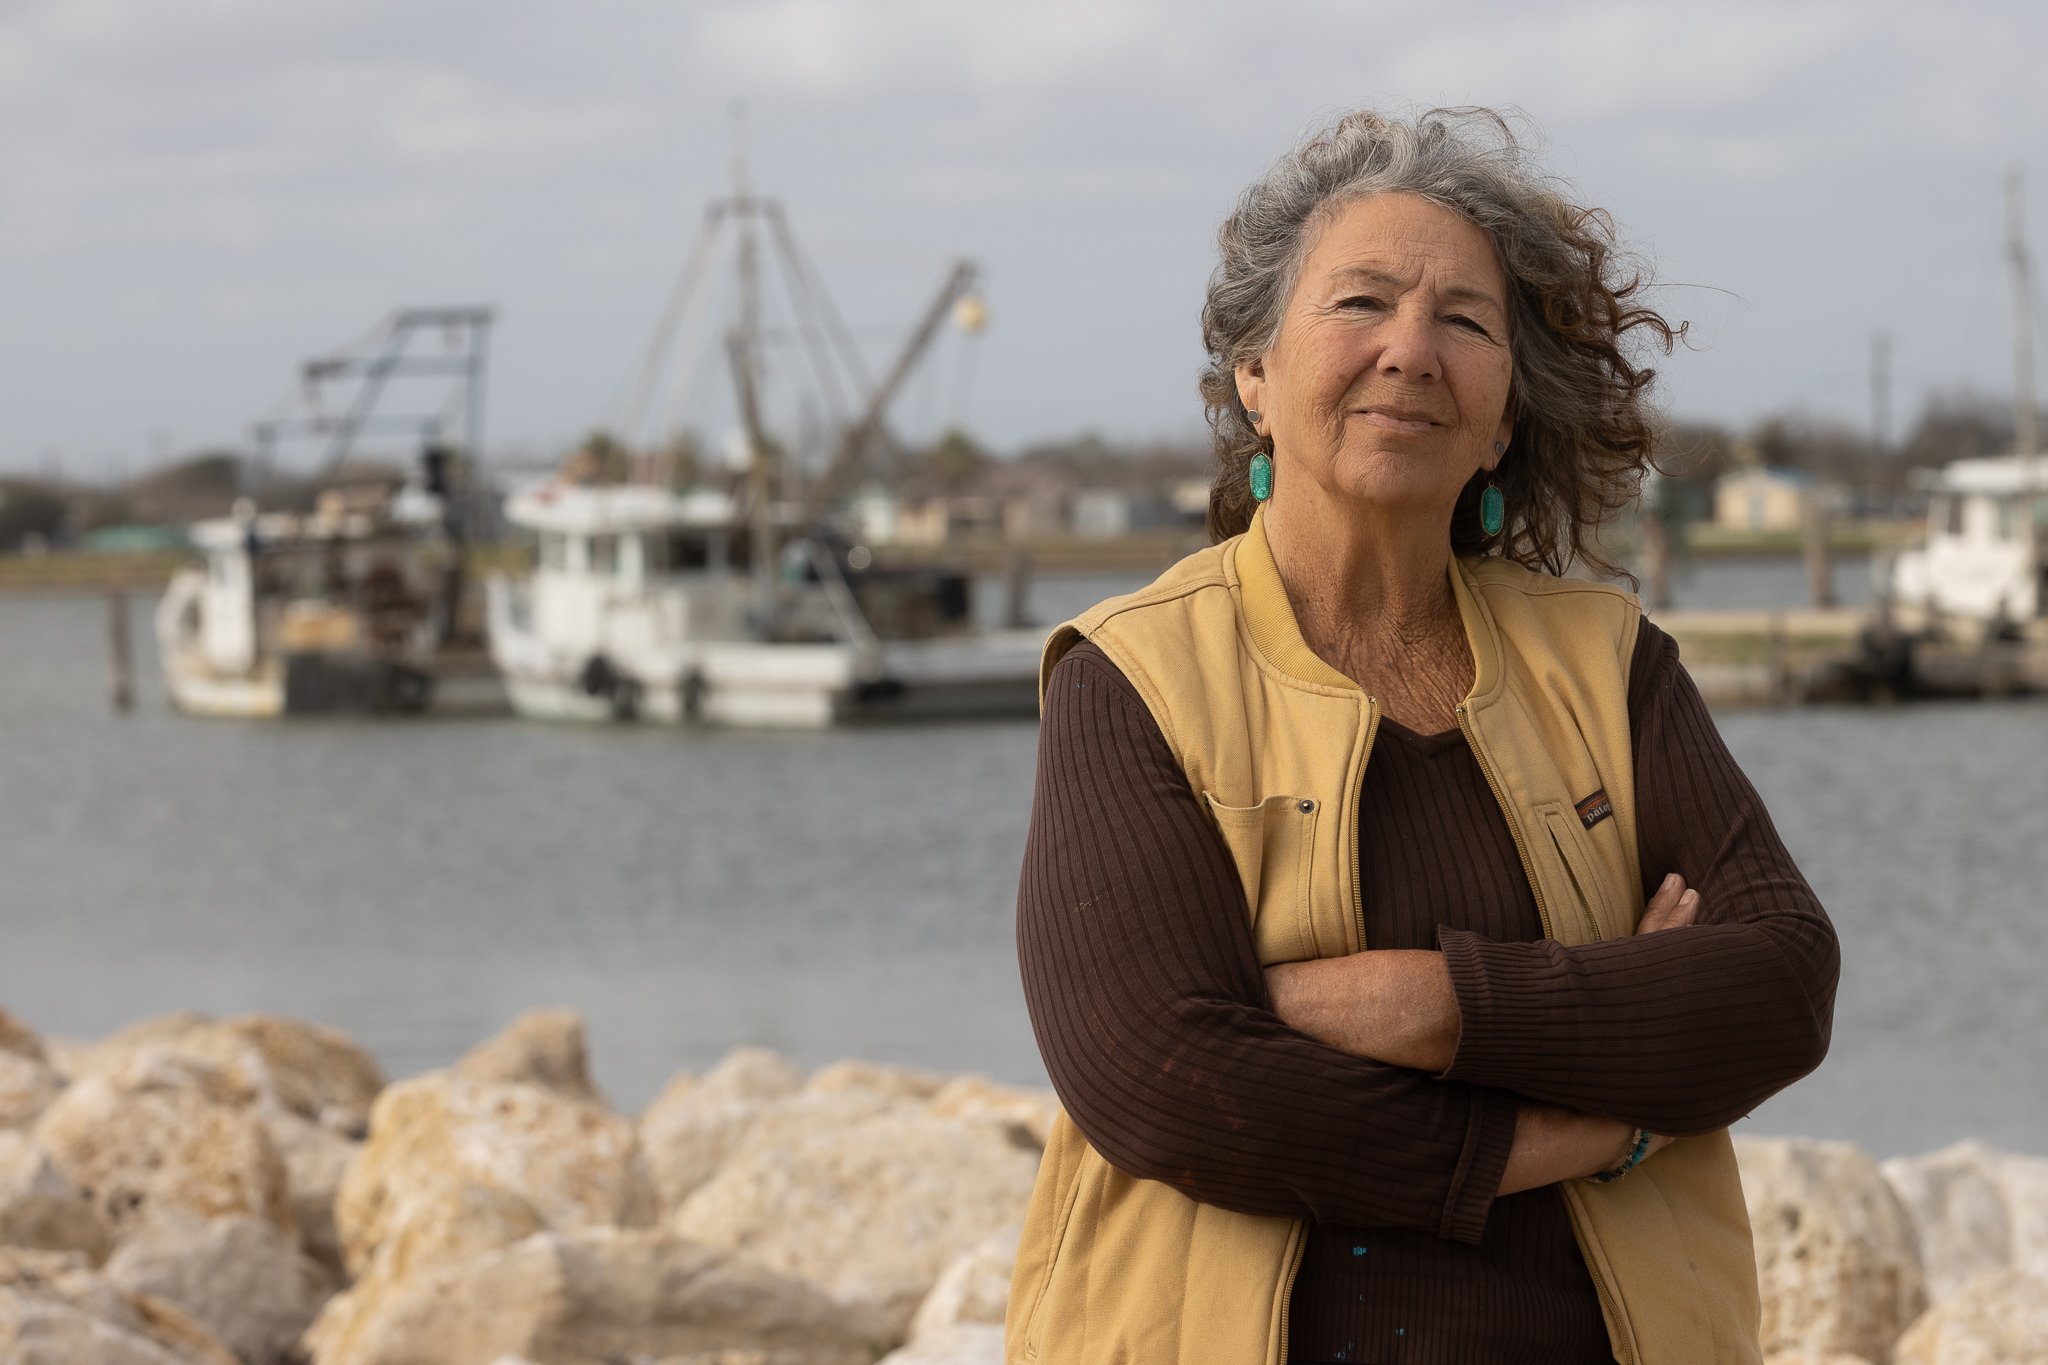 Diane Wilson, a gray-haired woman, stands on a rocky coast on the Gulf of Mexico with shrimp boats in the background.